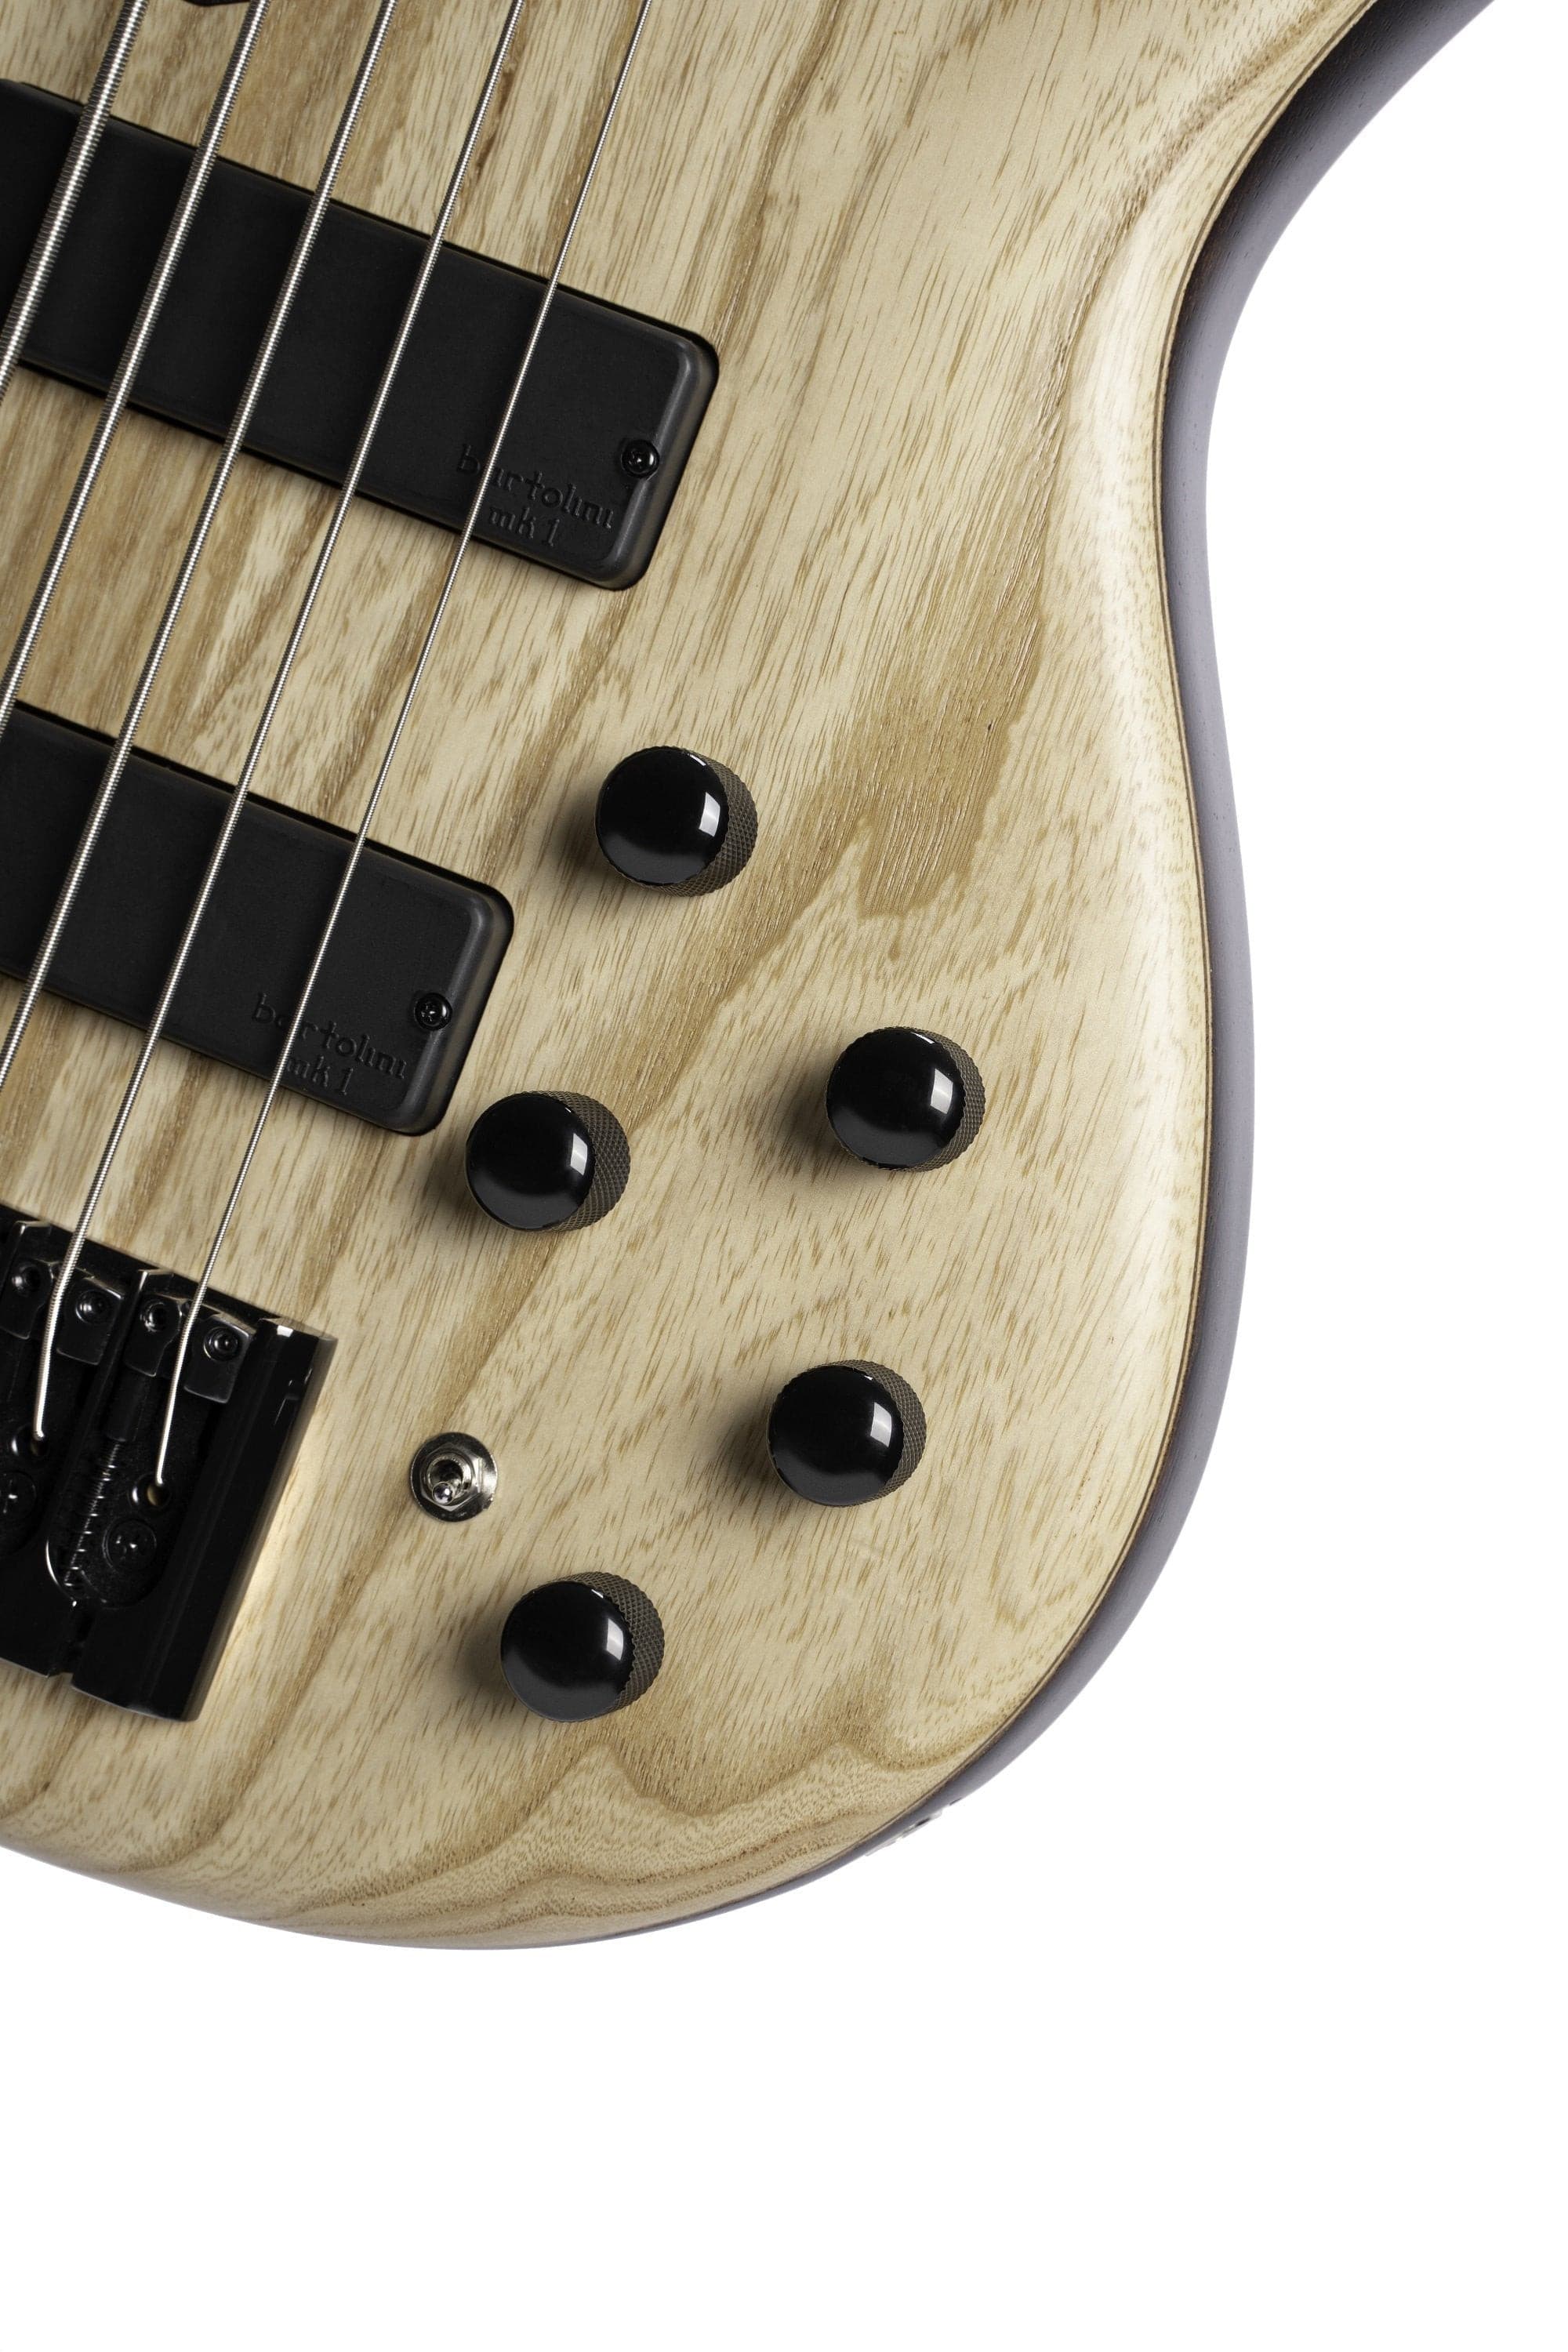 Cort B5 Element Open Pore Natural, Bass Guitar for sale at Richards Guitars.